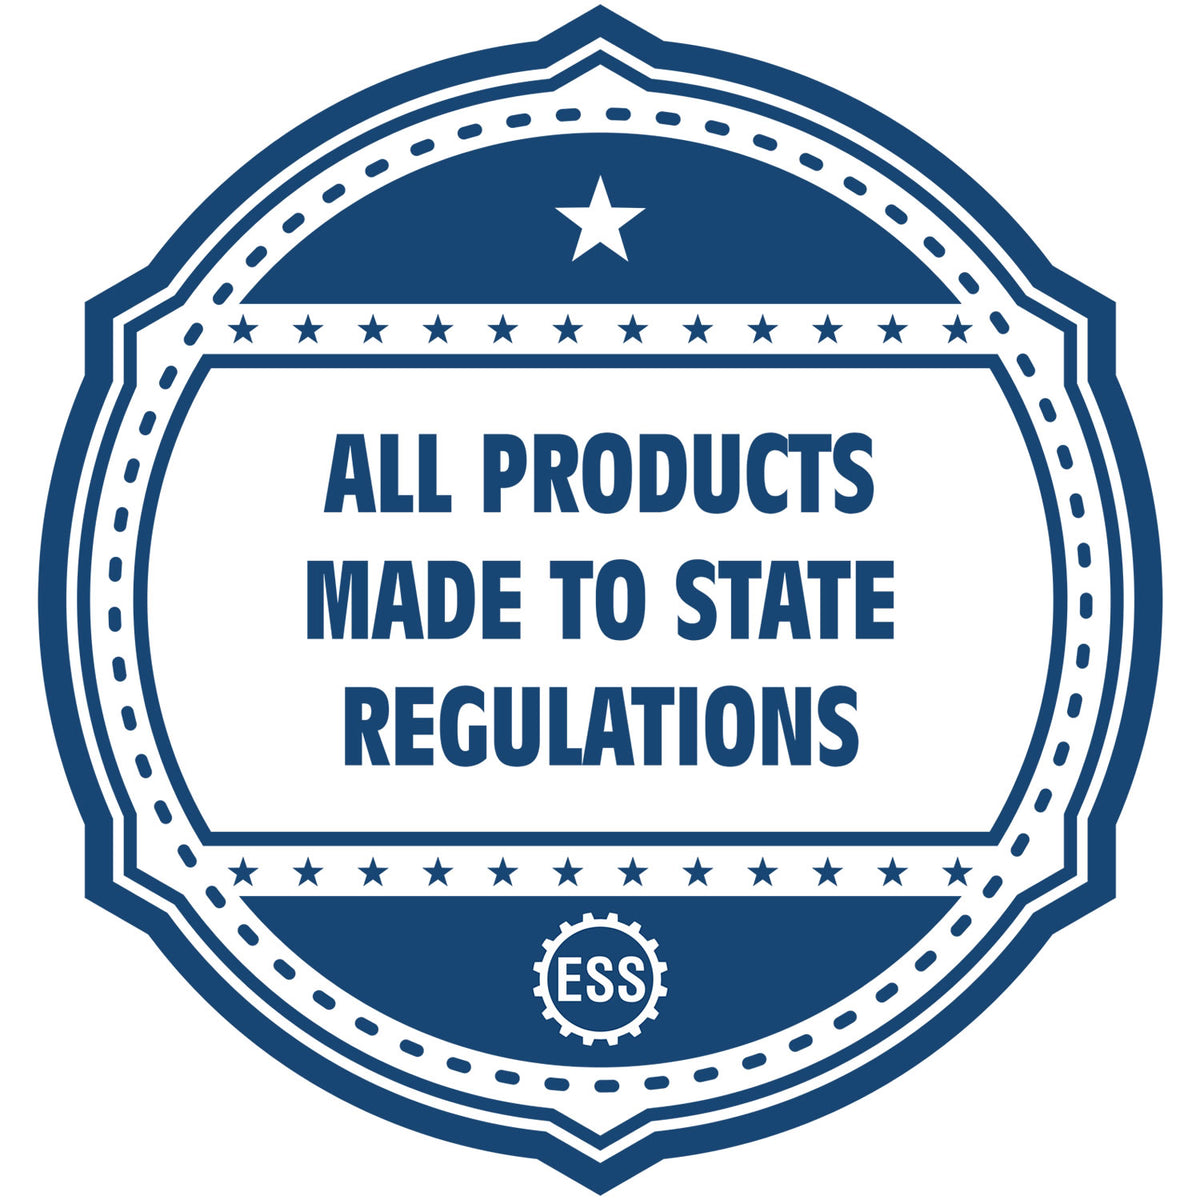 An icon or badge element for the Self-Inking Arizona Landscape Architect Stamp showing that this product is made in compliance with state regulations.